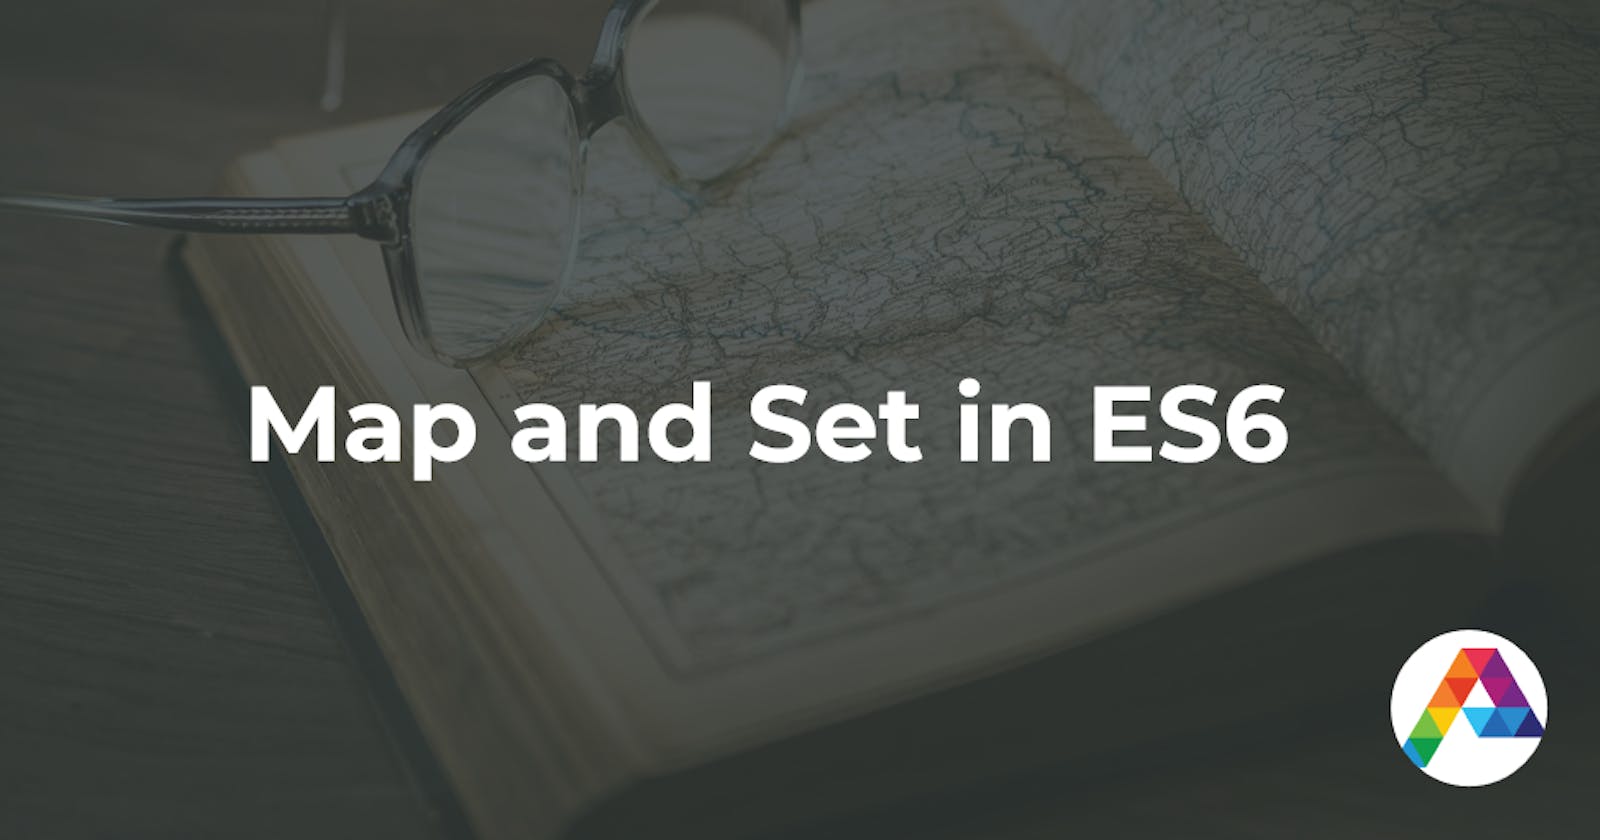 Map and Set in ES6